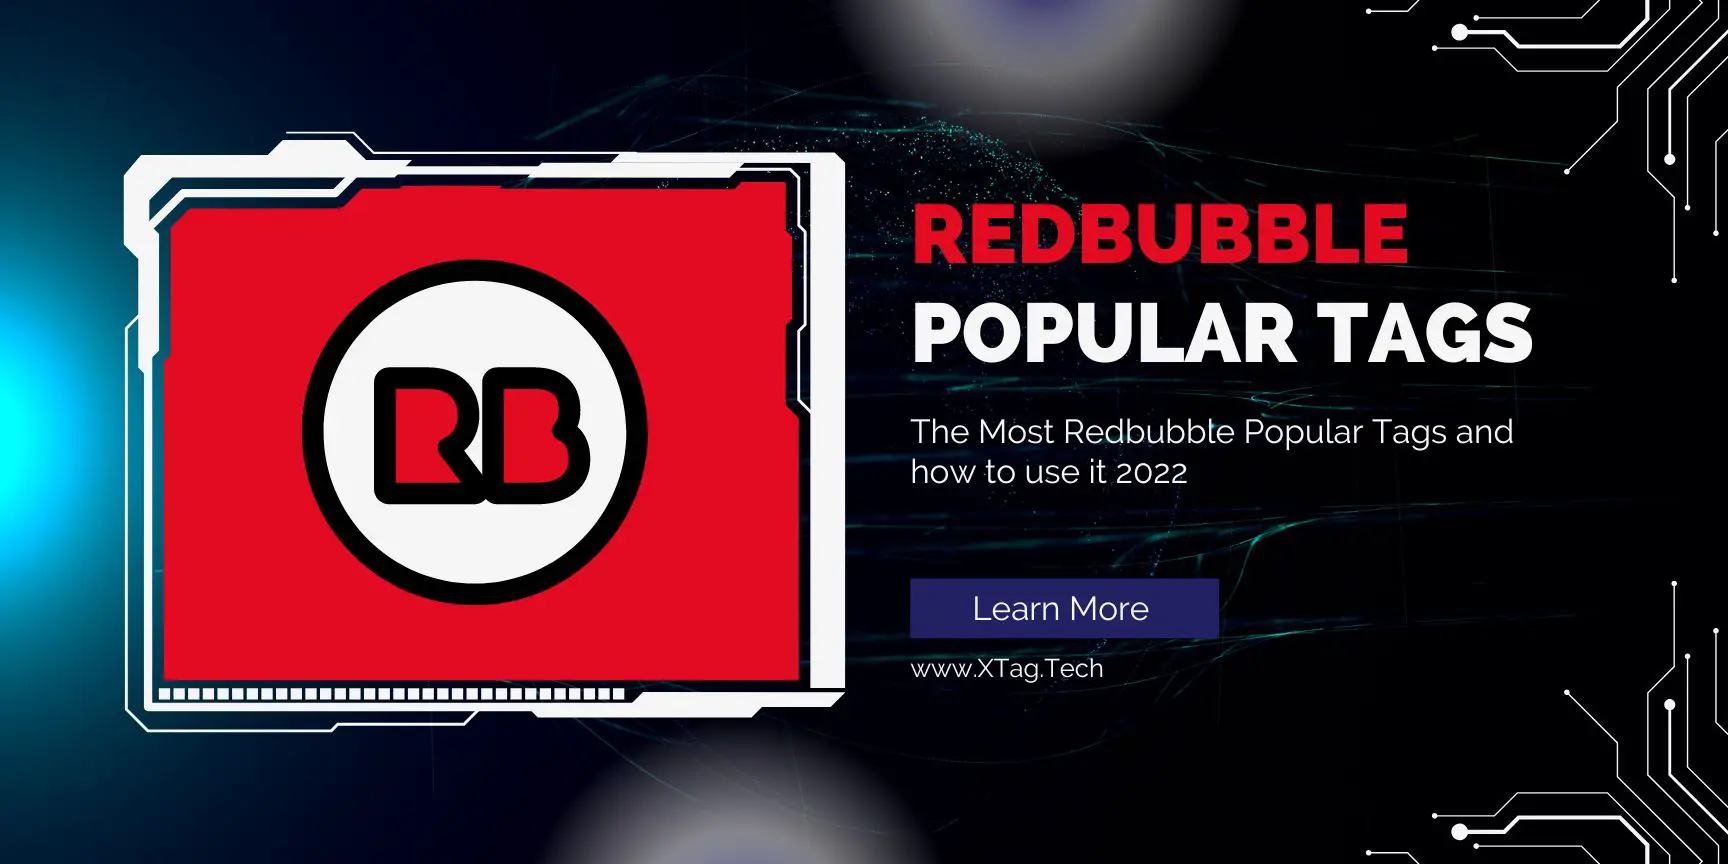 The Most Redbubble Popular Tags and how to use it 2022